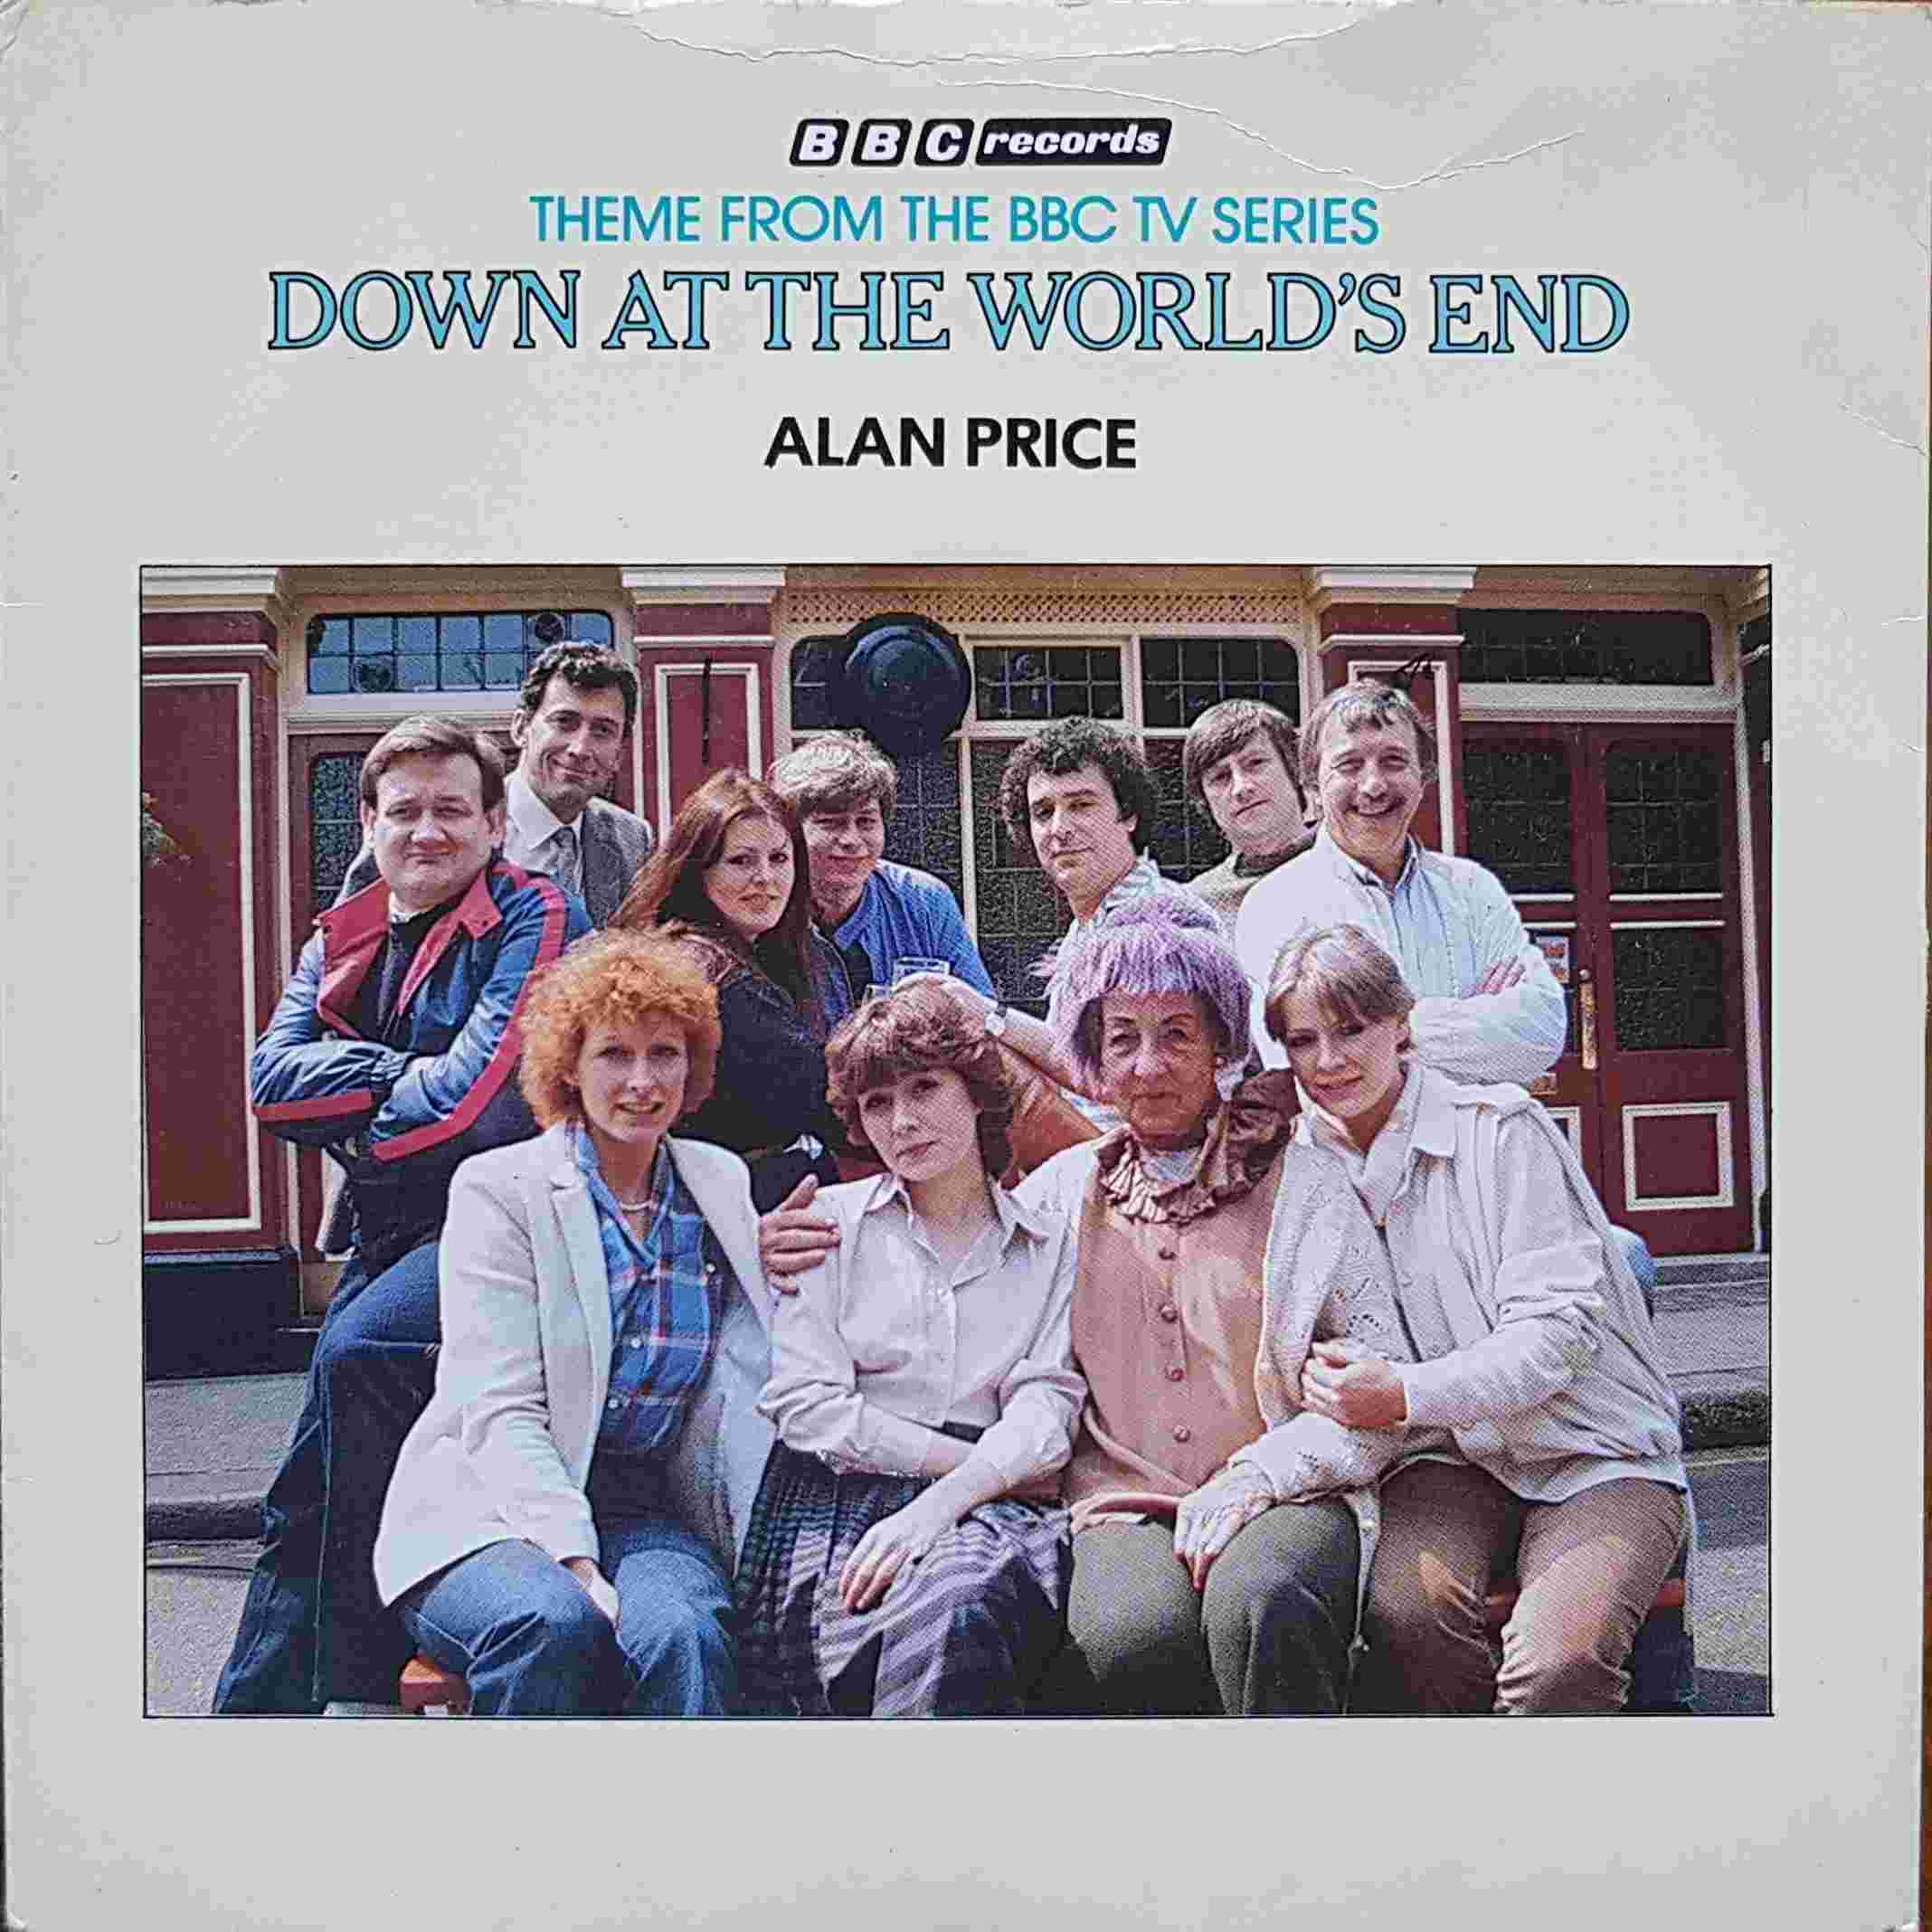 Picture of RESL 100 Down at the World's End (World's End) by artist Alan Price from the BBC records and Tapes library